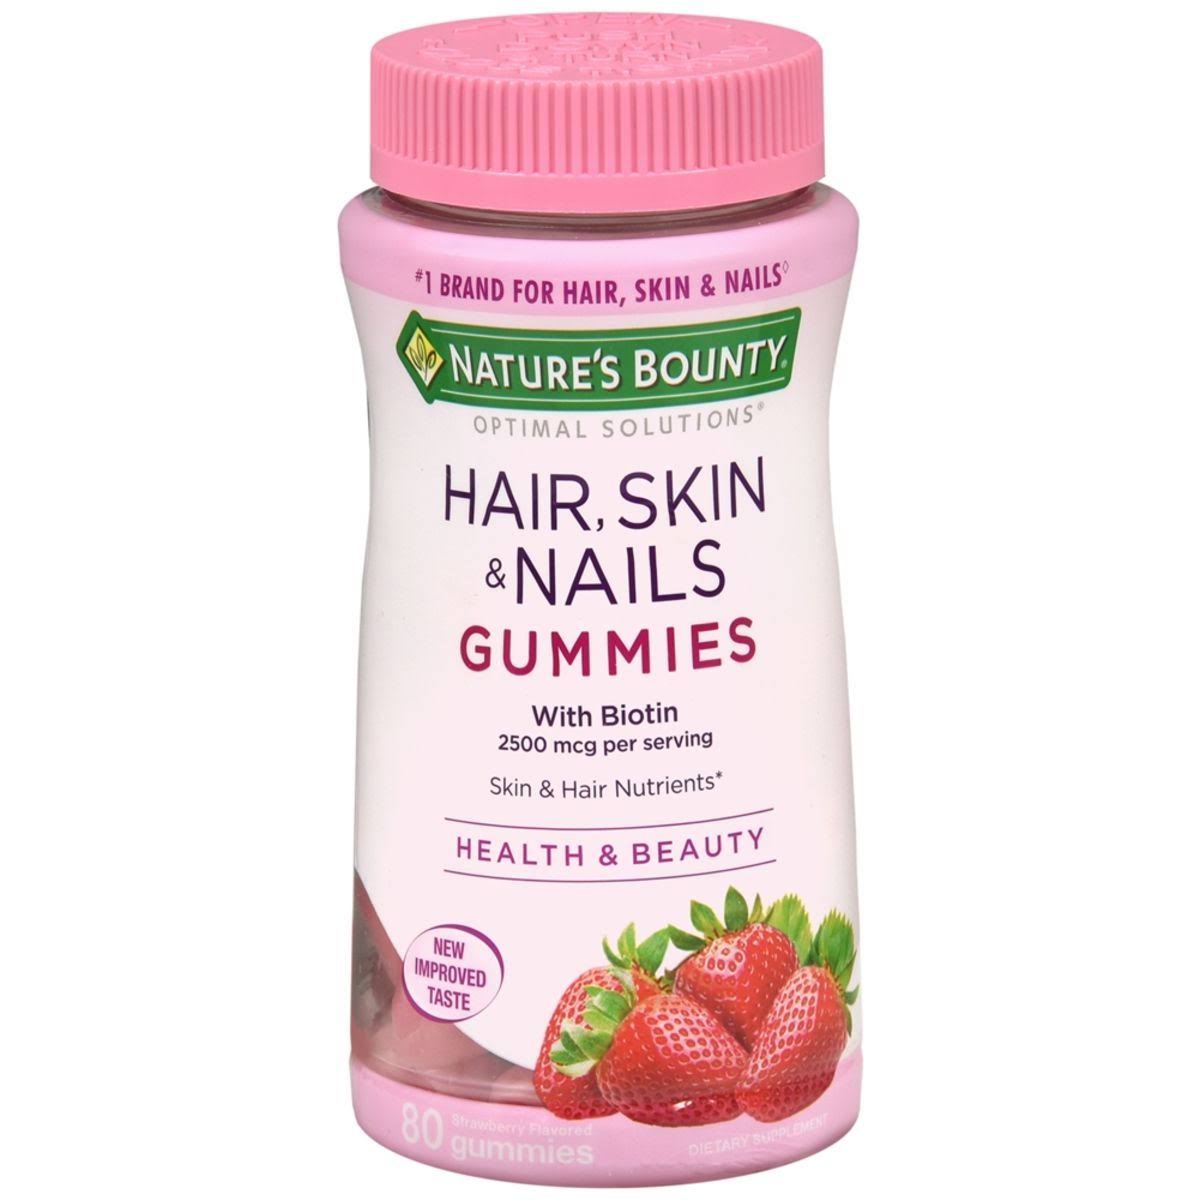 Nature's Bounty Optimal Solutions Hair, Skin and Nails Gummies - 80 Count